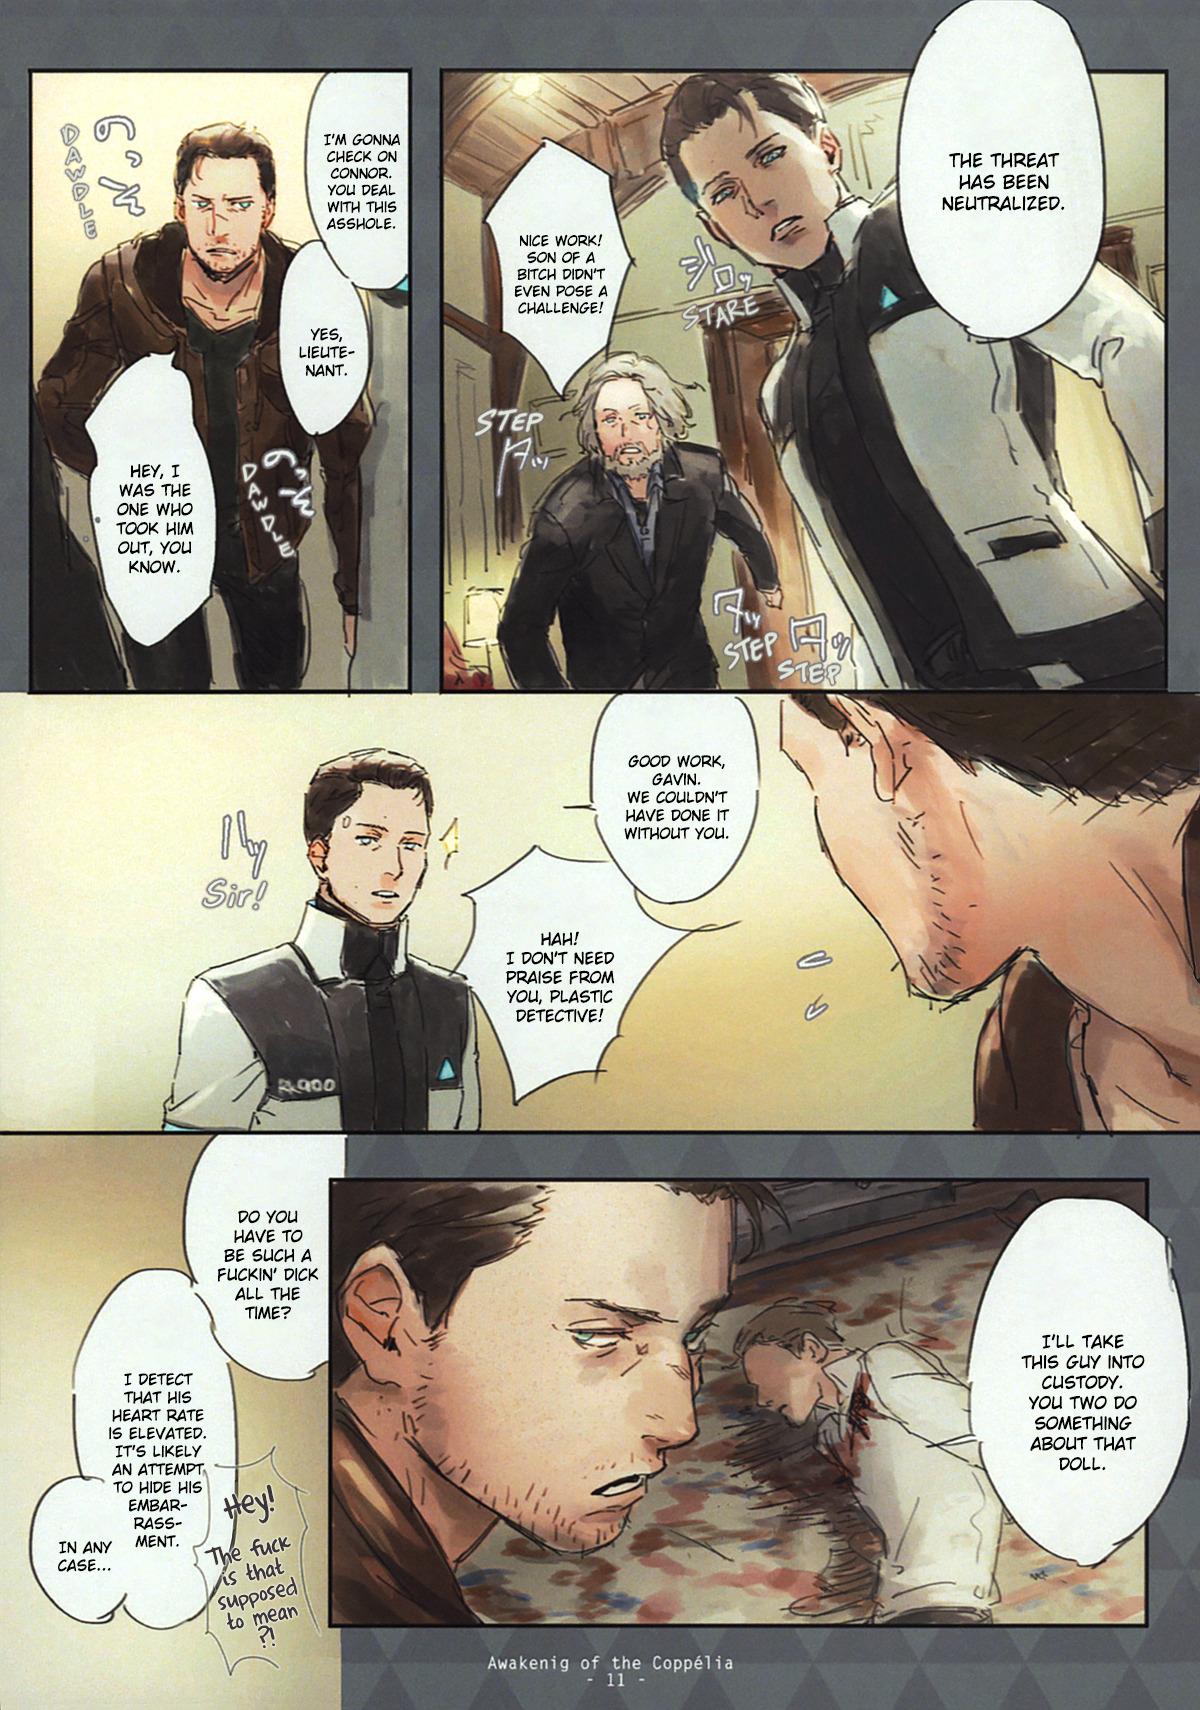 Blow Job Contest Awakening of Copper - Detroit become human Shower - Page 7